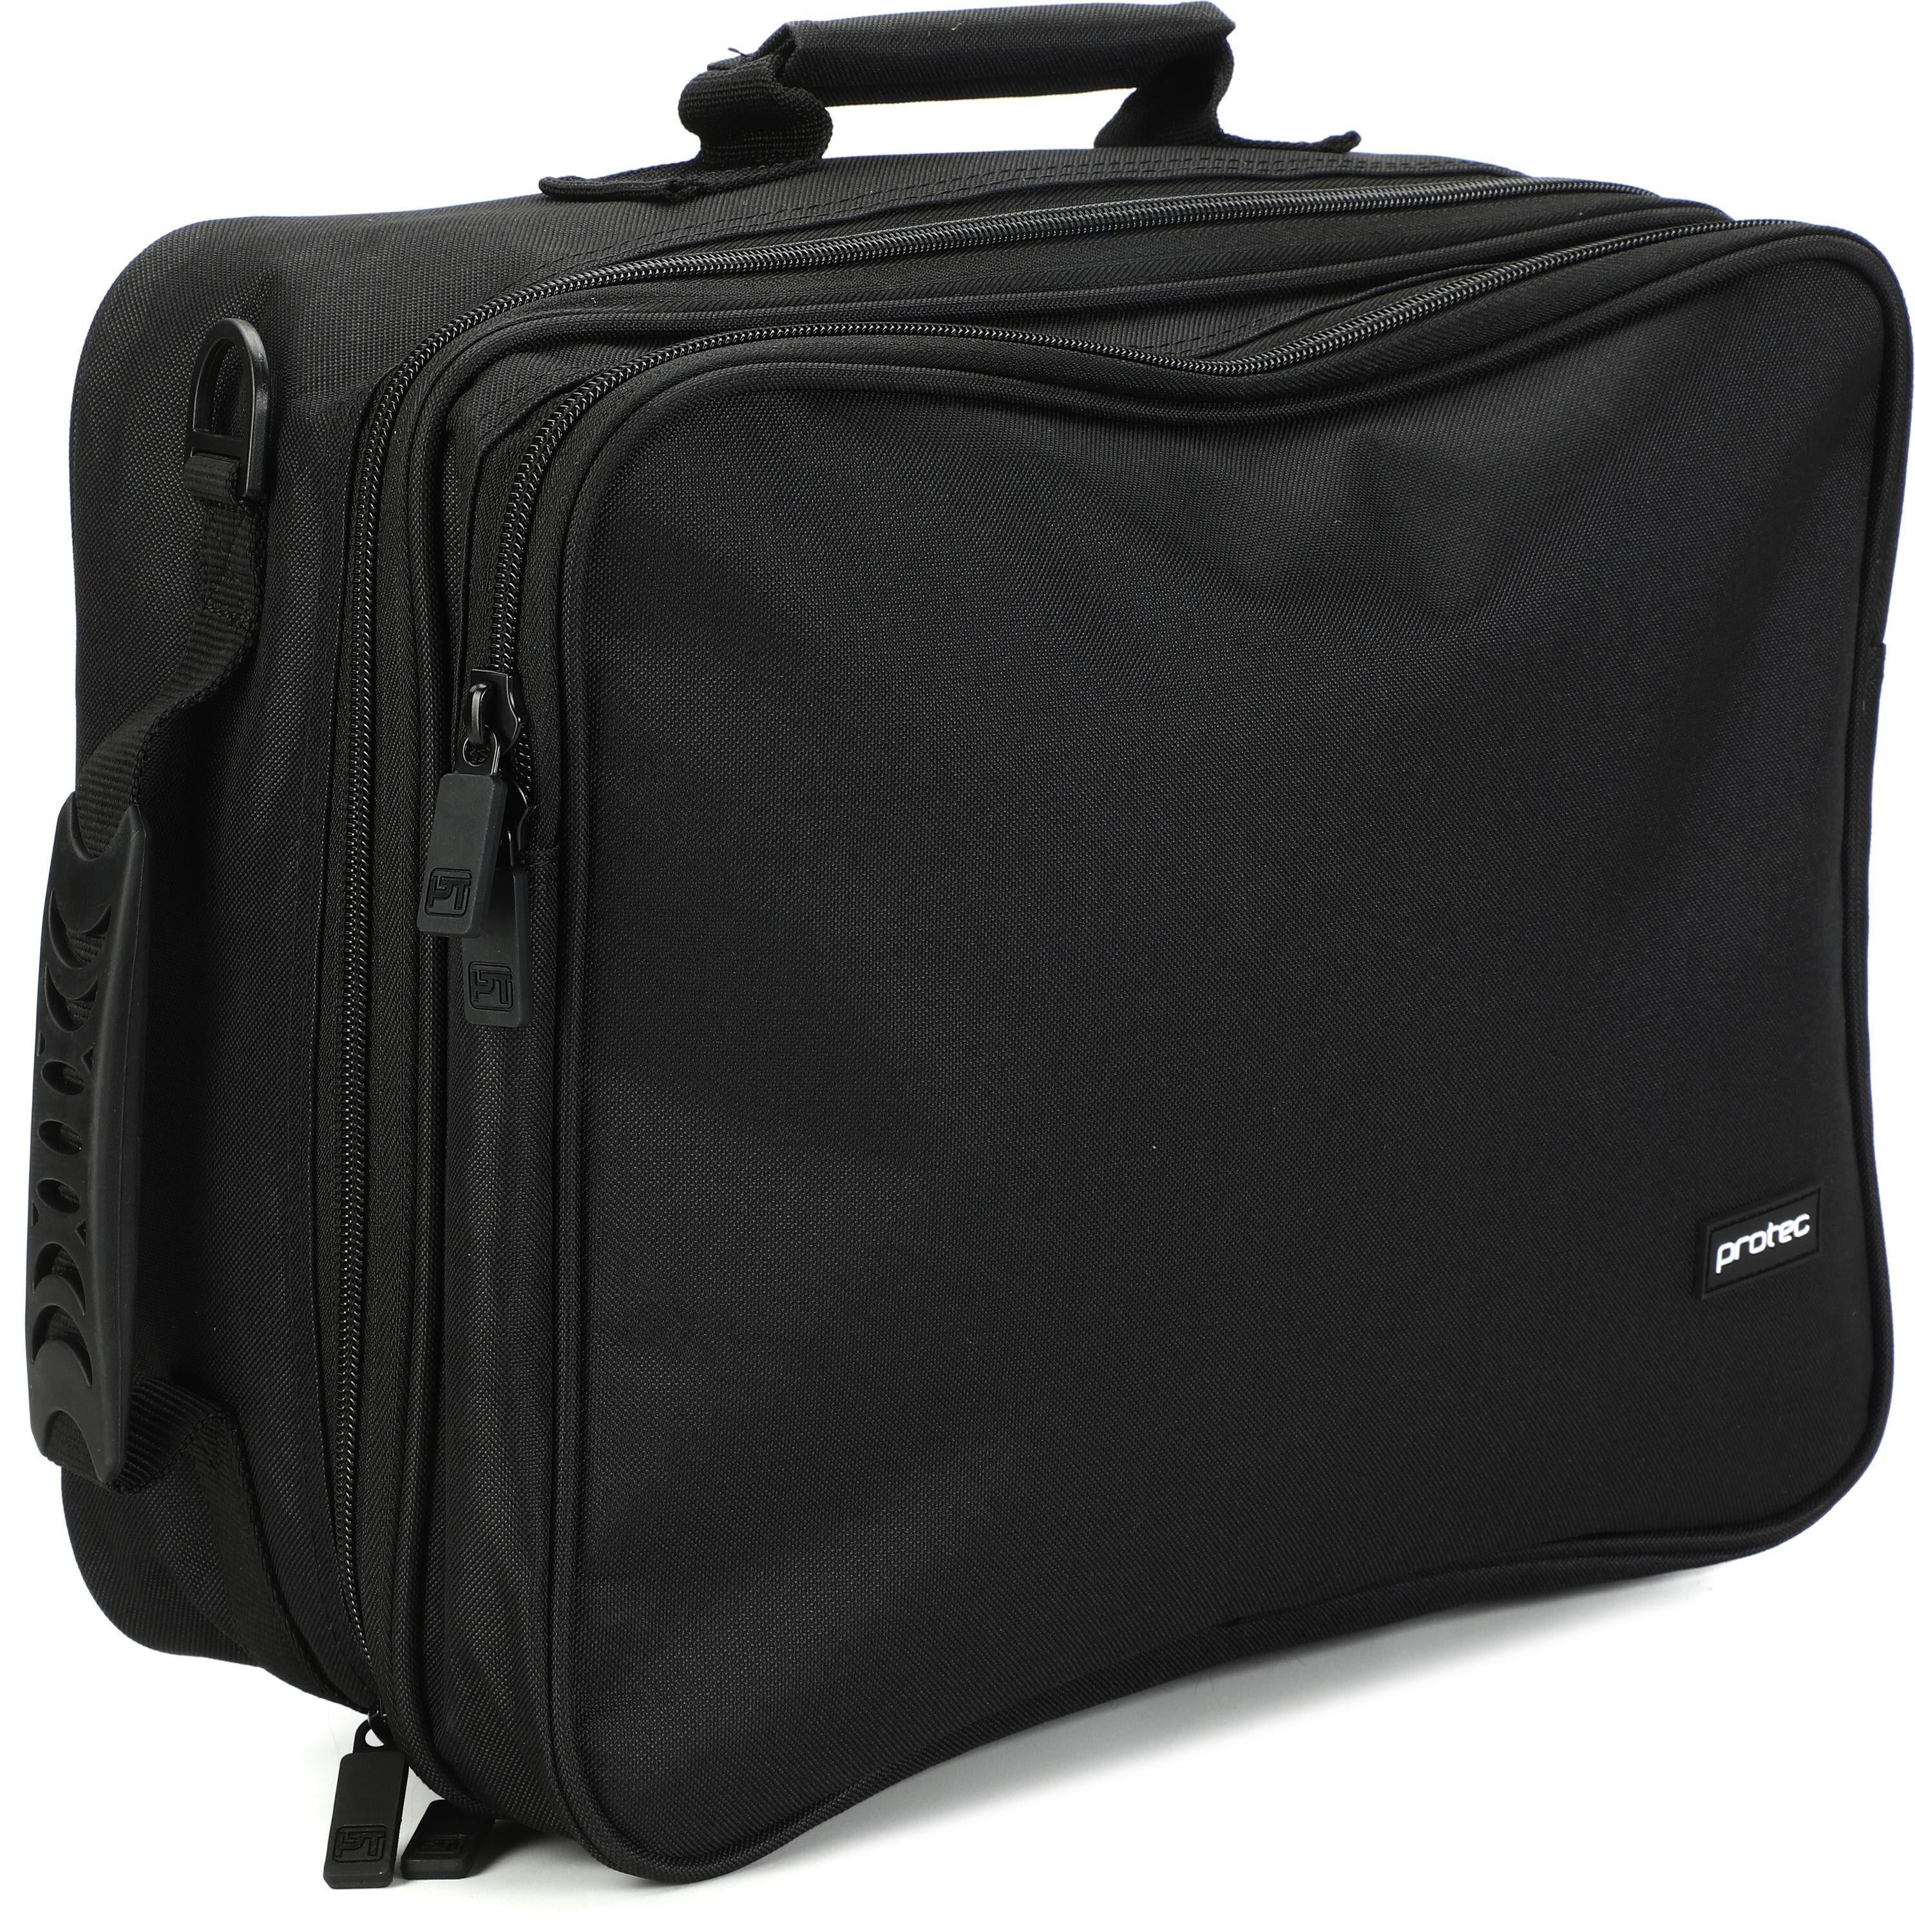 Protec A307 Clarinet/Oboe Deluxe Case Cover - Black | Sweetwater